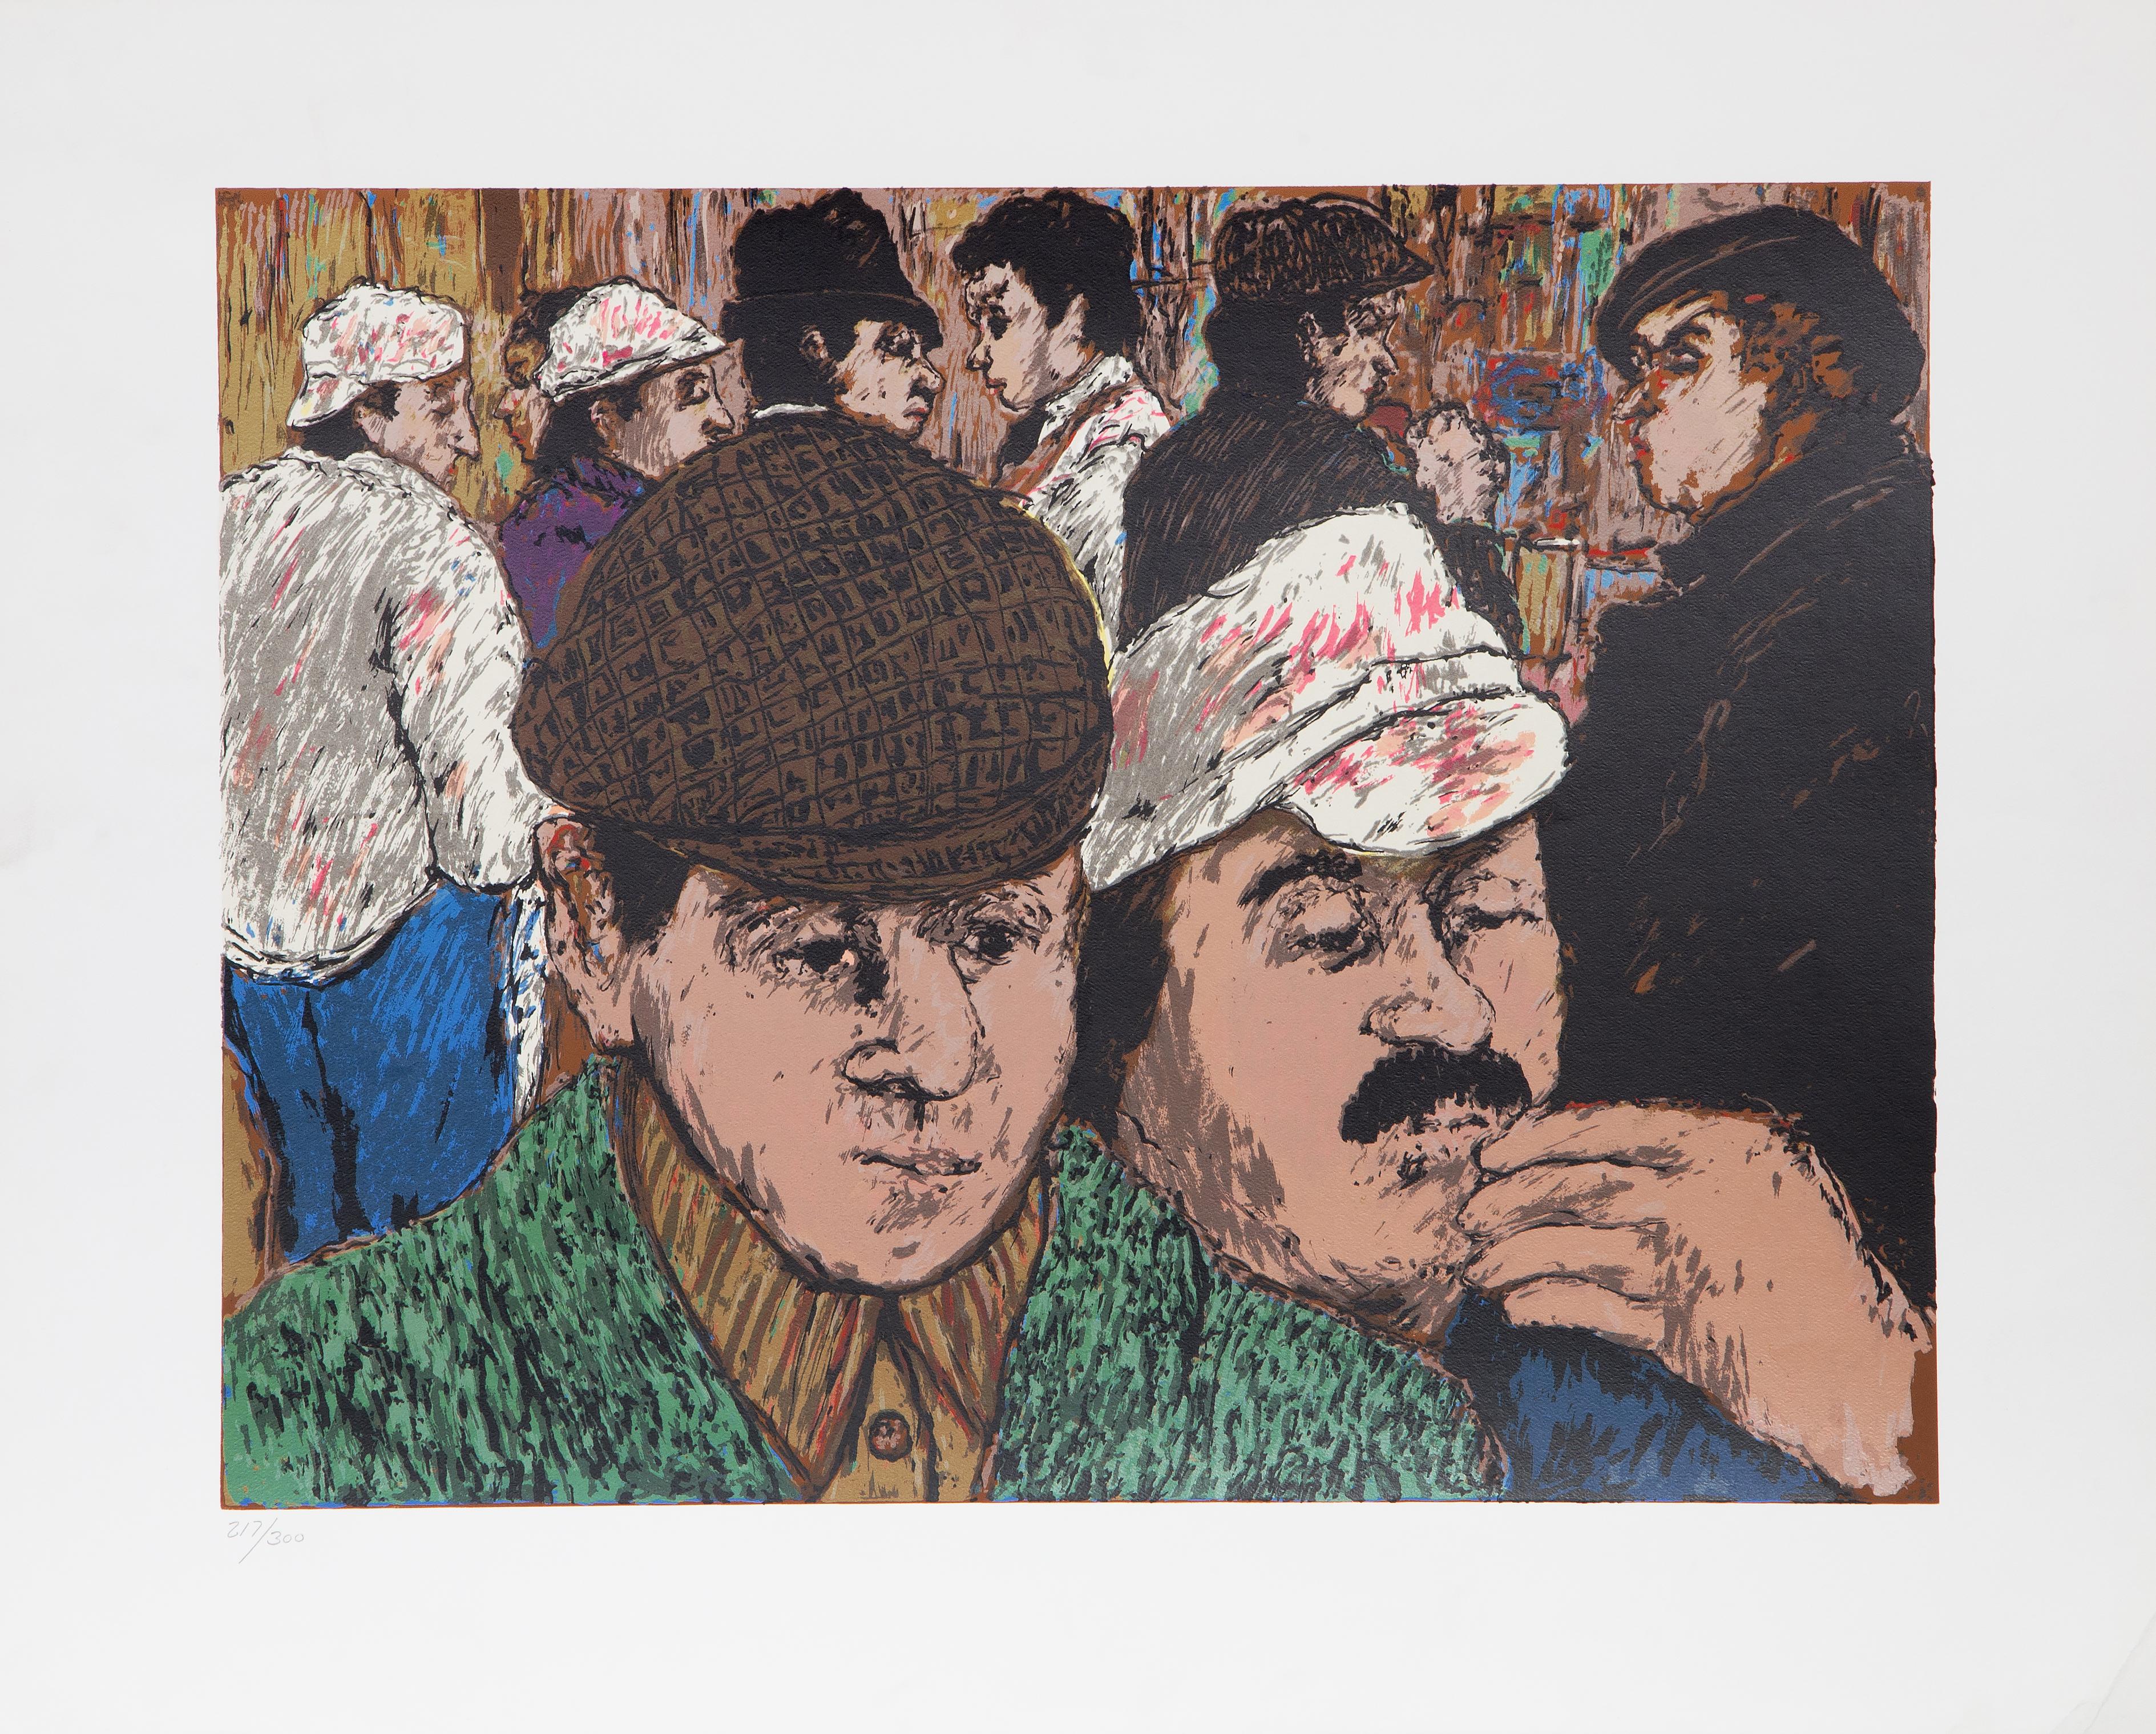 Men in Hats
David Azuz, Israeli/French (1942–2014)
Date: circa 1980
Lithograph, numbered in pencil
Edition of 217/300
Image Size: 19.75 x 25.5 inches
Size: 26 x 32.5 in. (66.04 x 82.55 cm)